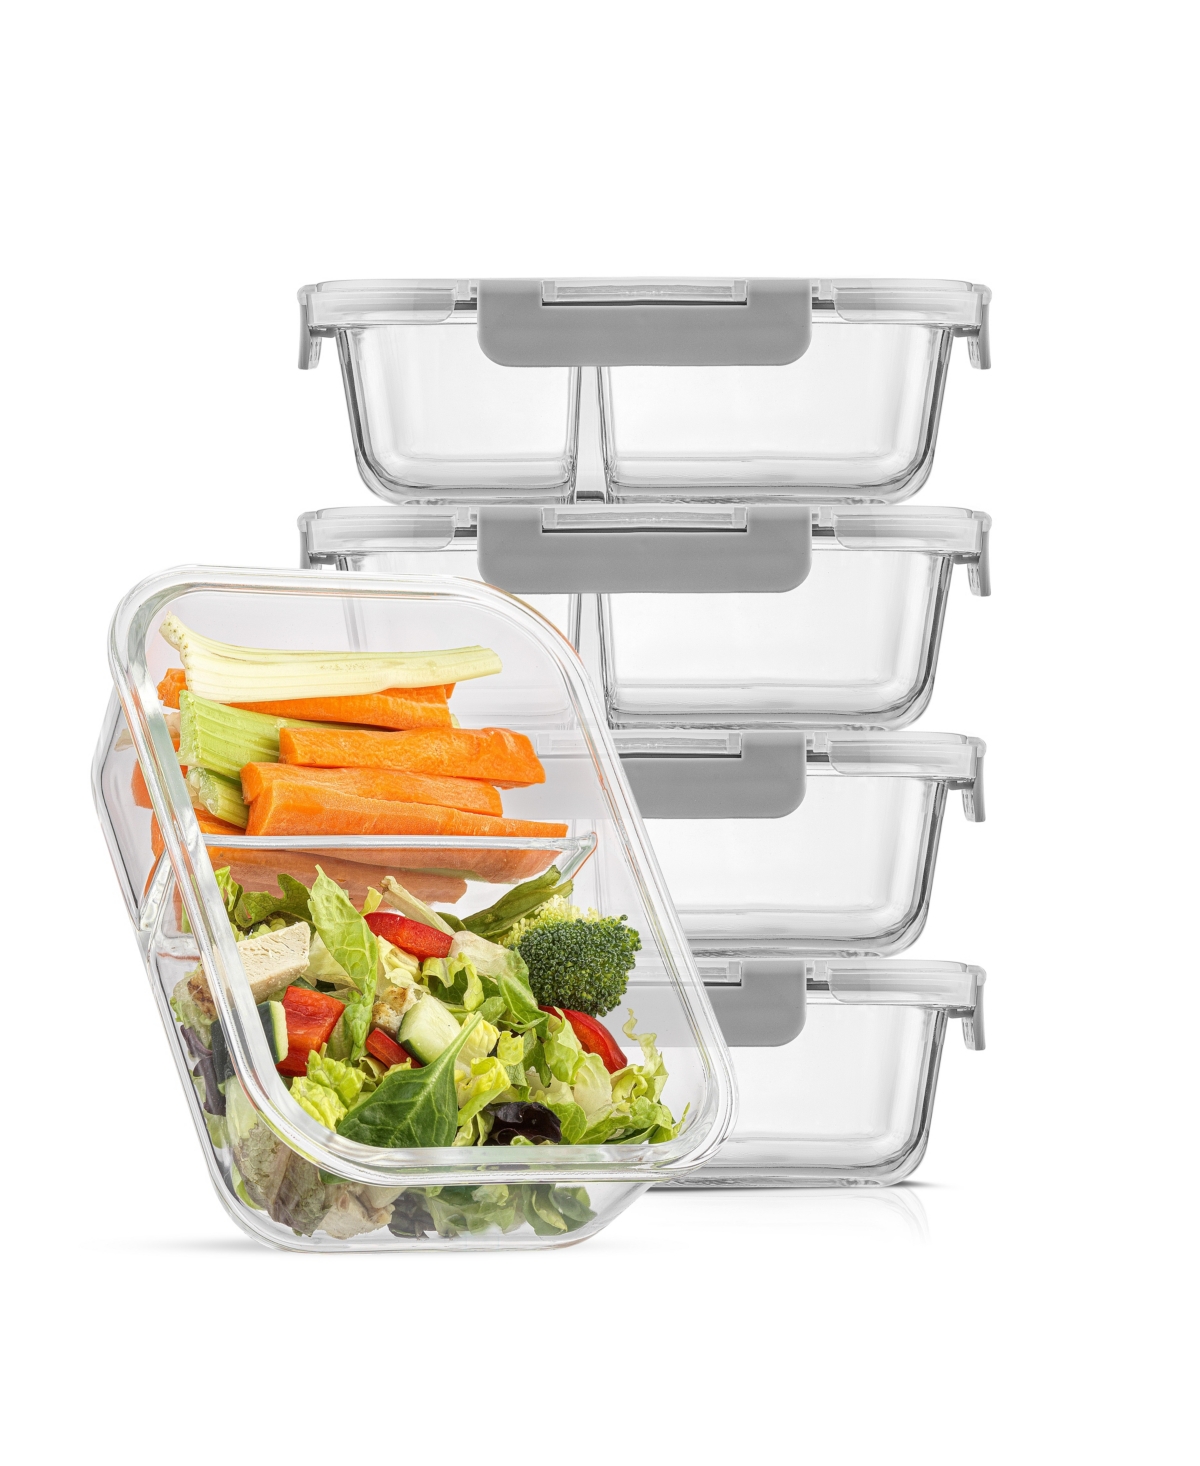 Glass Meal Prep Containers 2 Compartments, Set of 5 - Clear, Gray